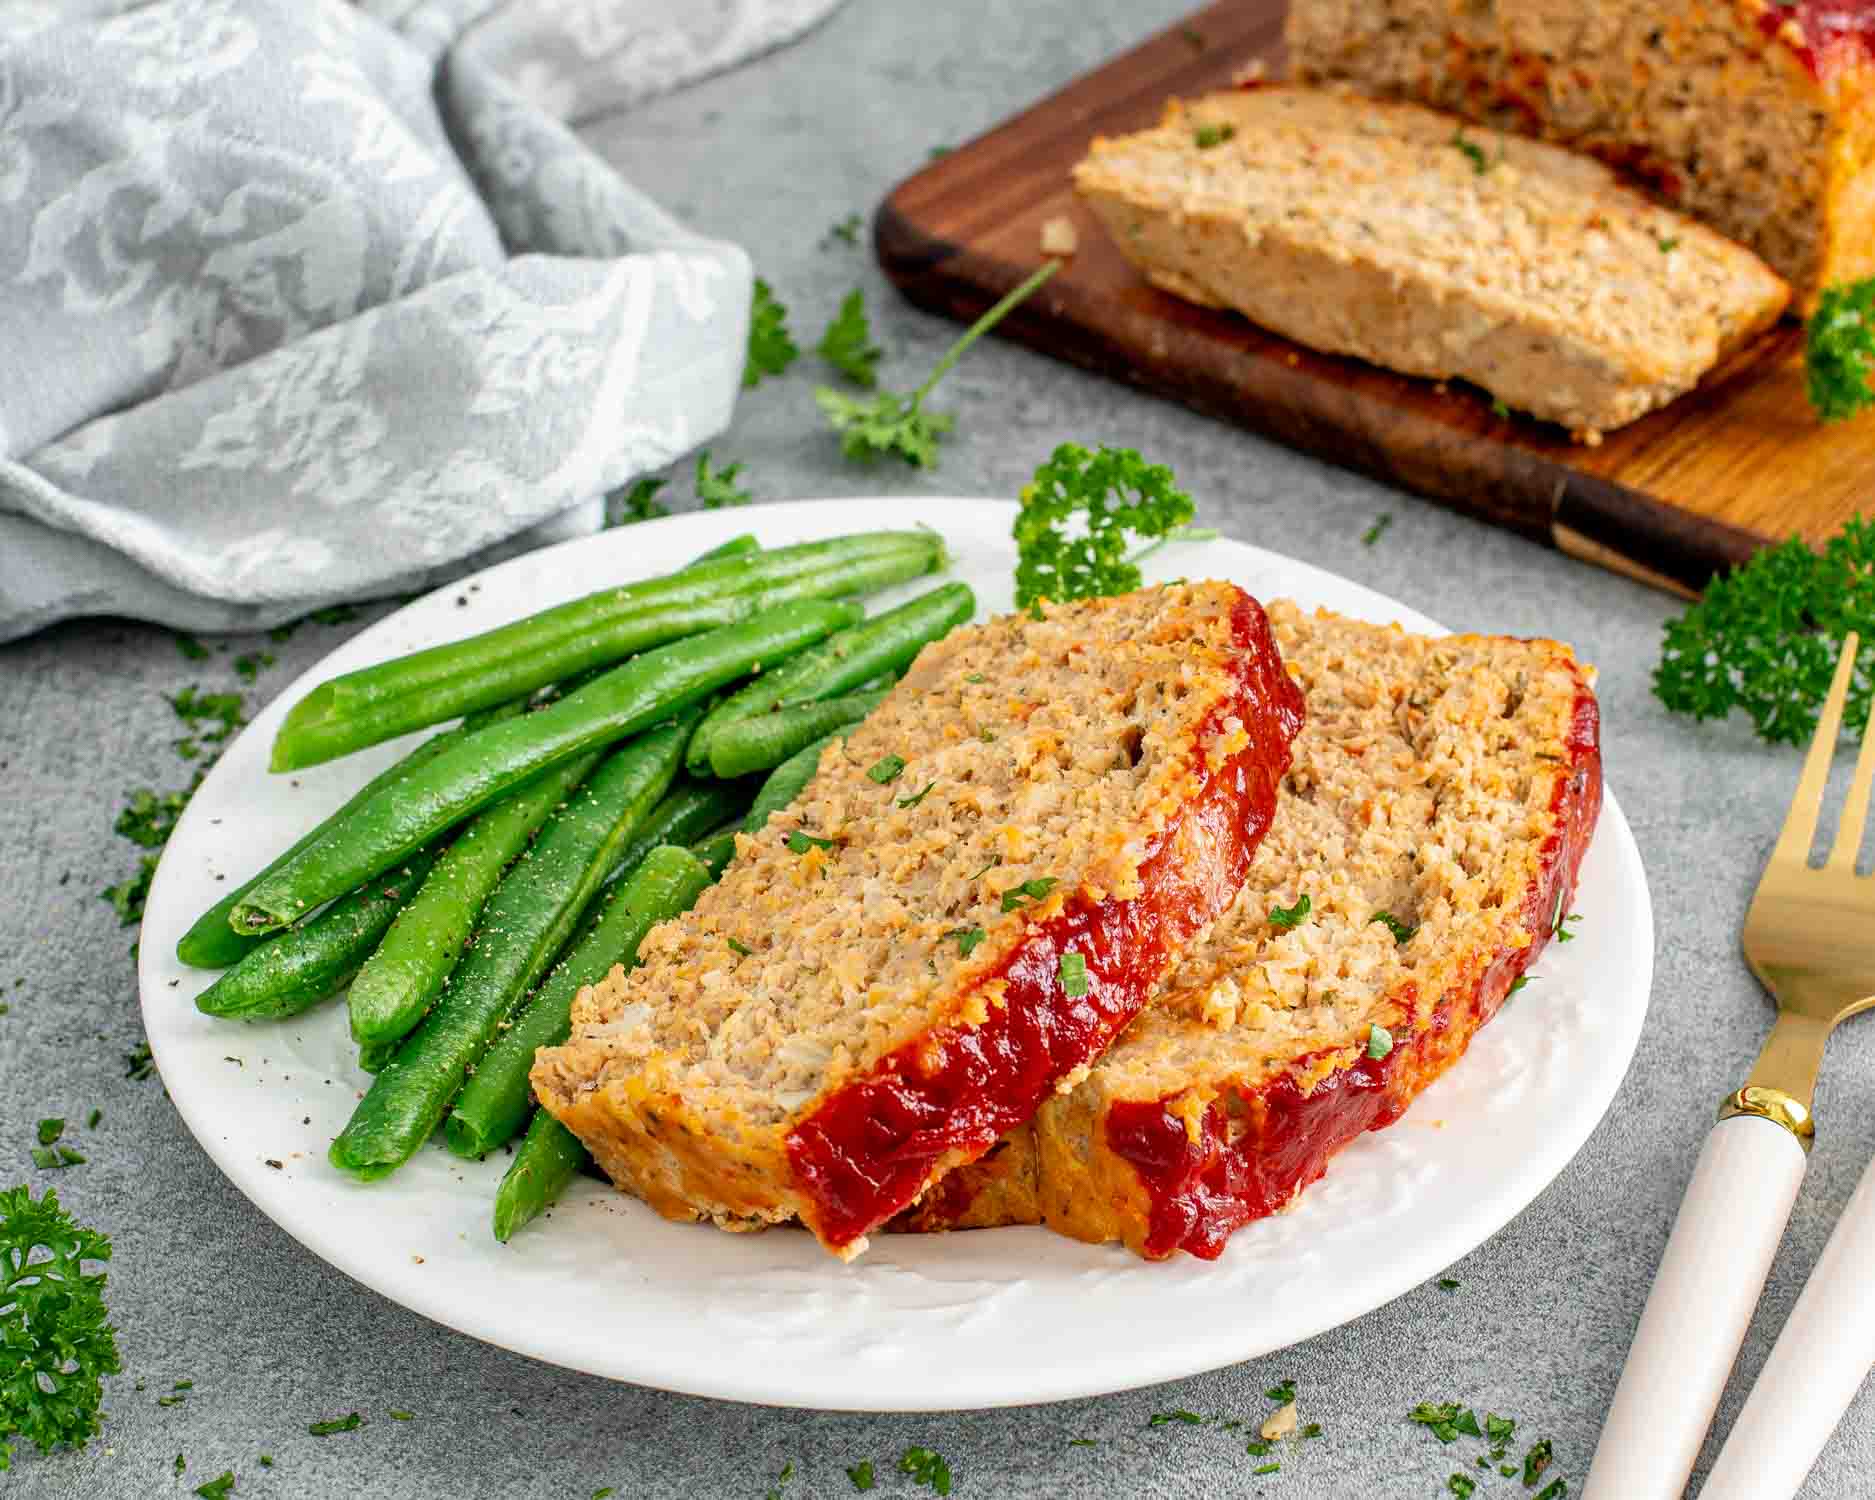 two slices of chicken meatloaf with green beans on a white plate.